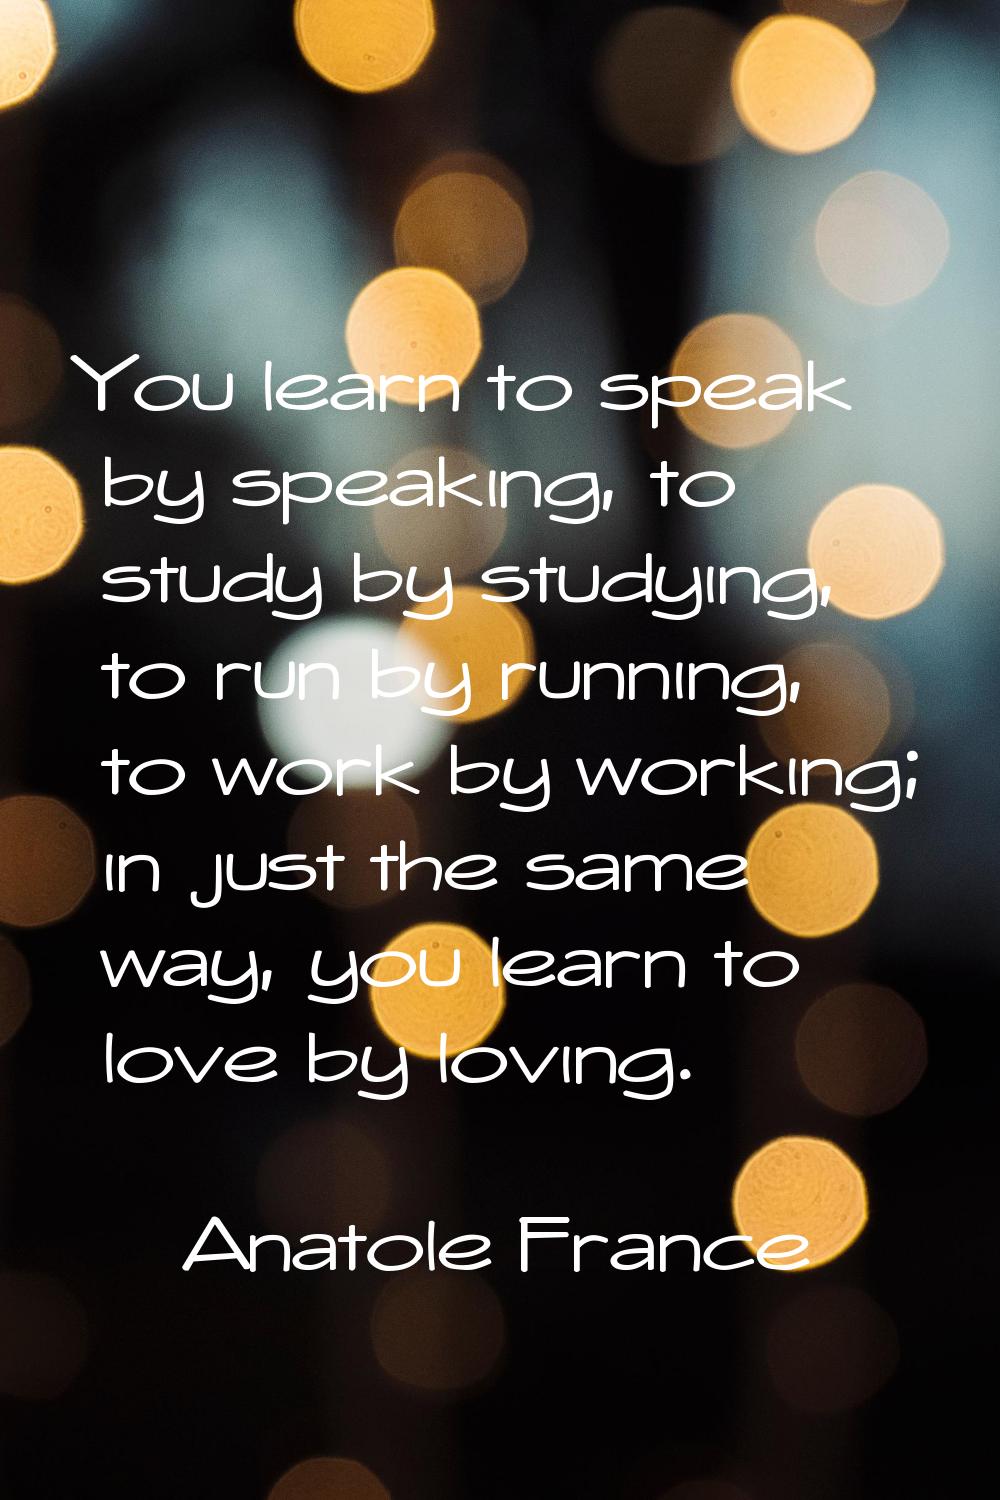 You learn to speak by speaking, to study by studying, to run by running, to work by working; in jus